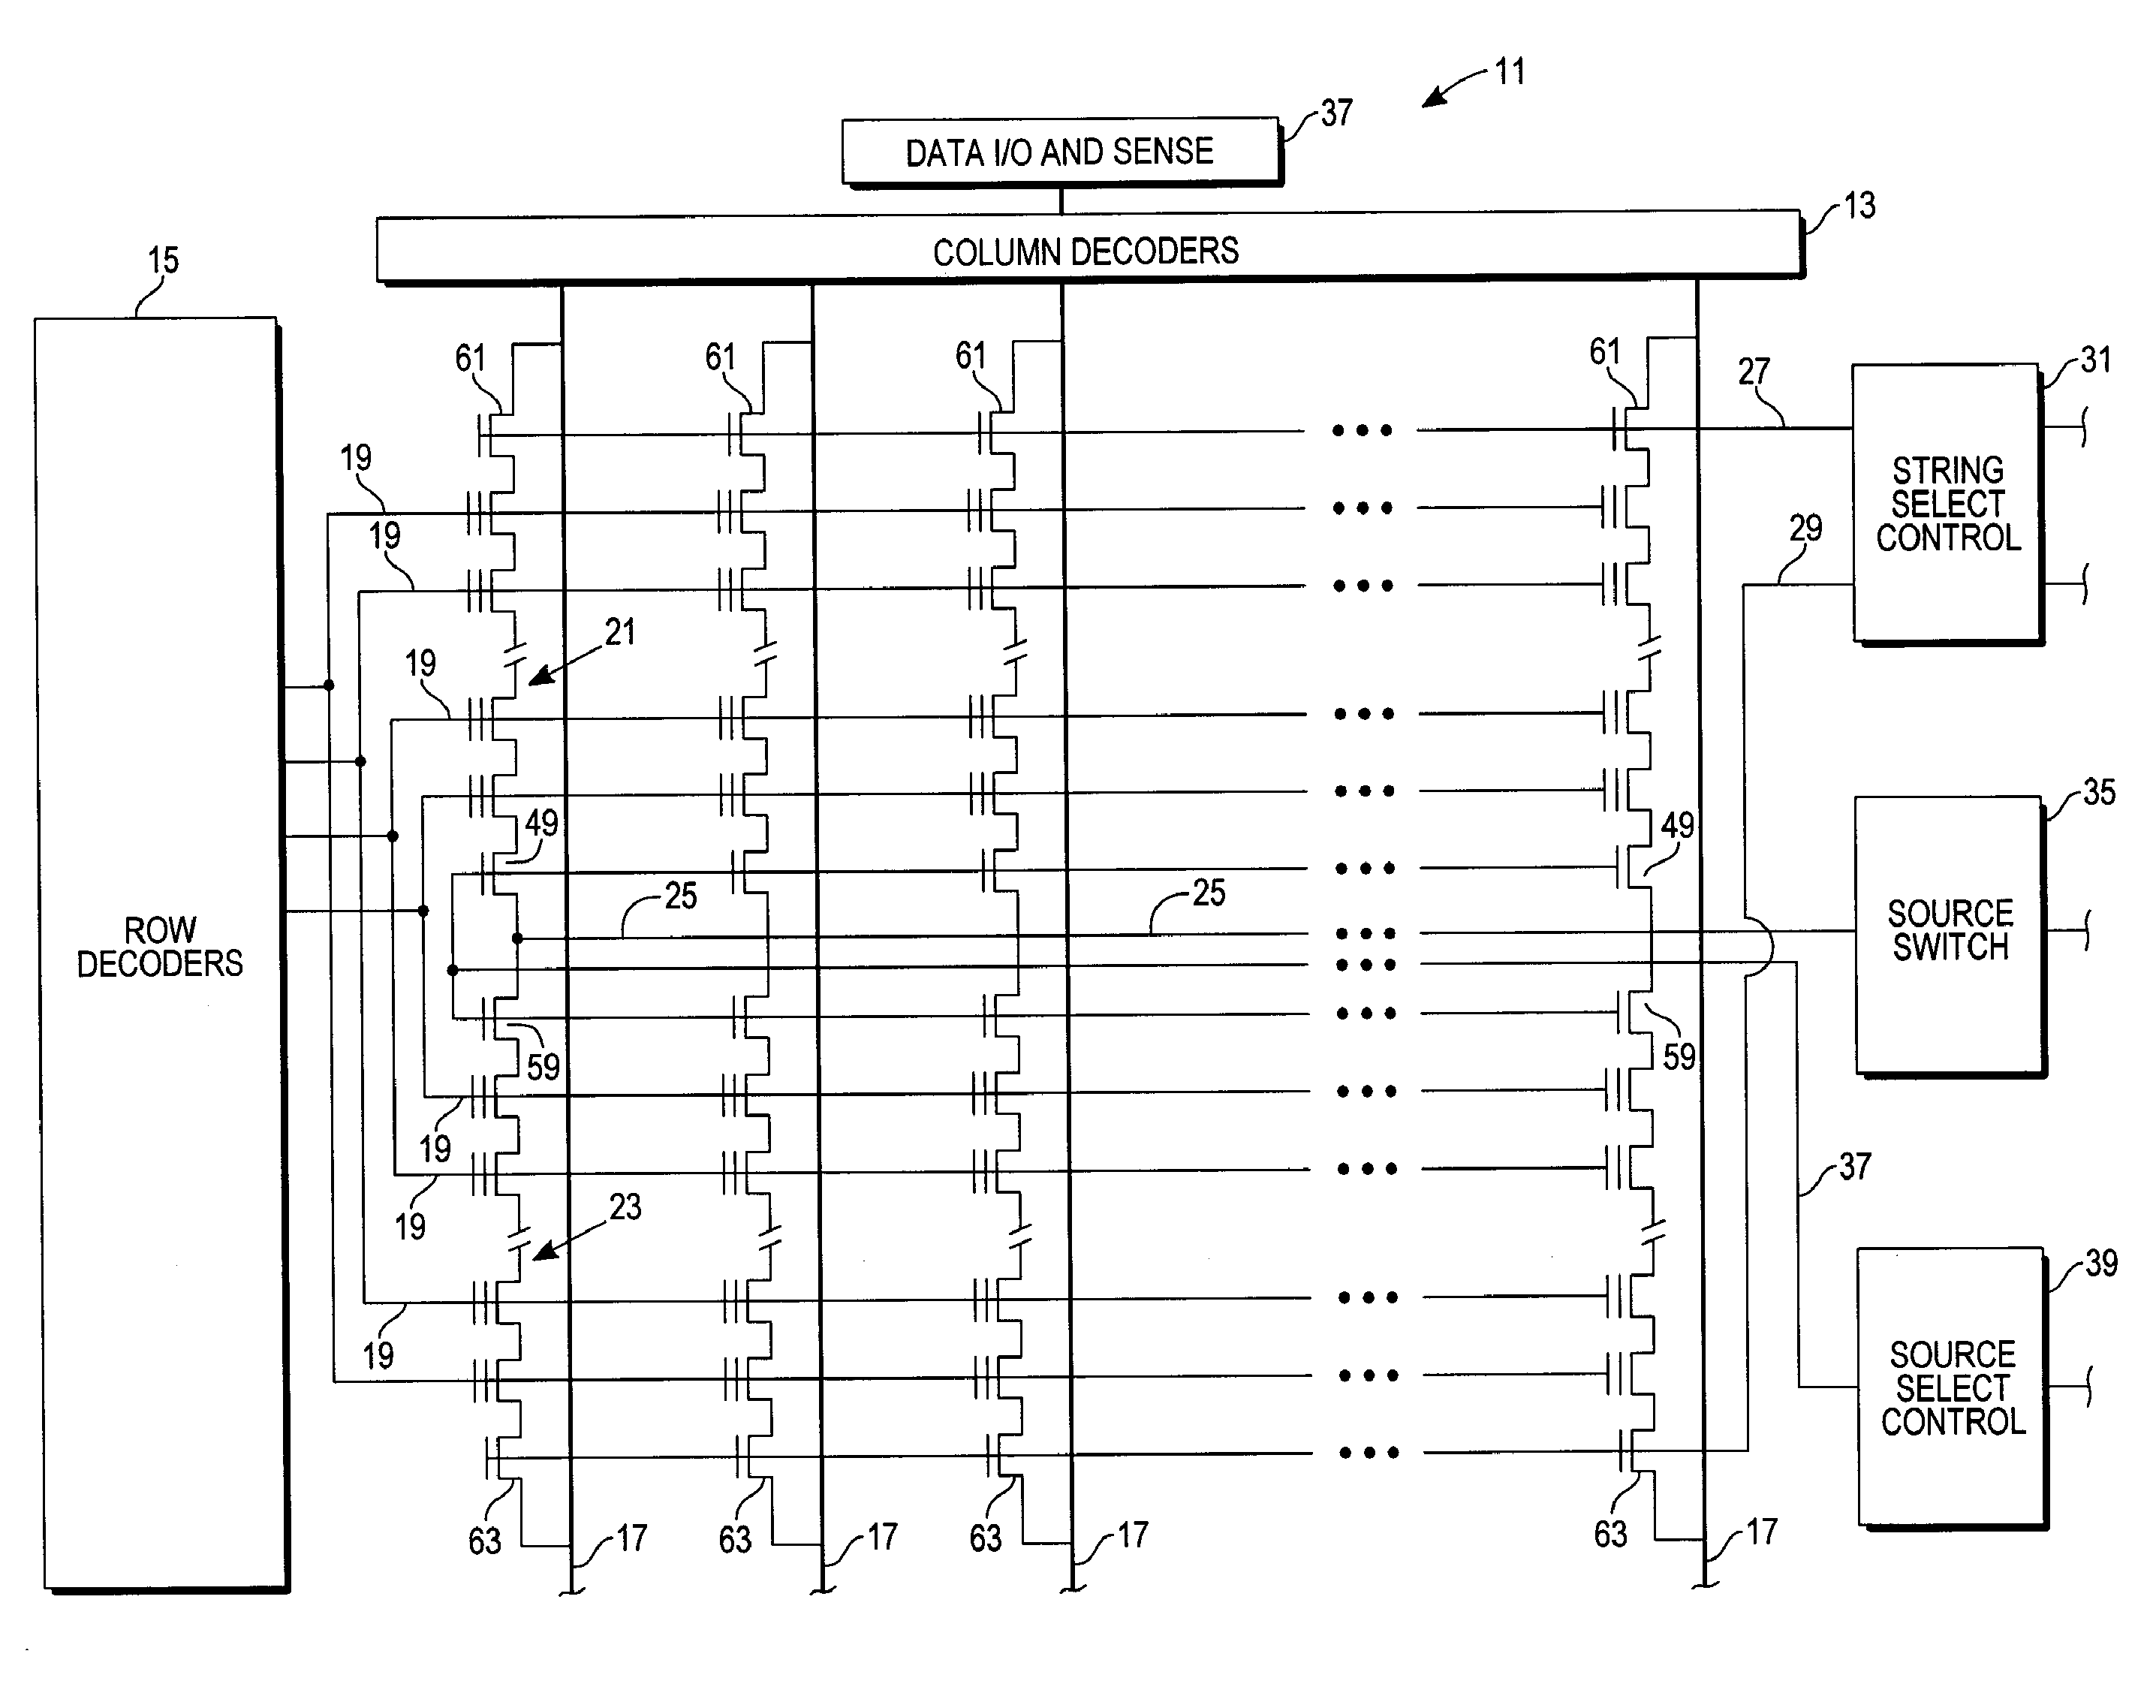 Non-volatile memory array architecture with joined word lines